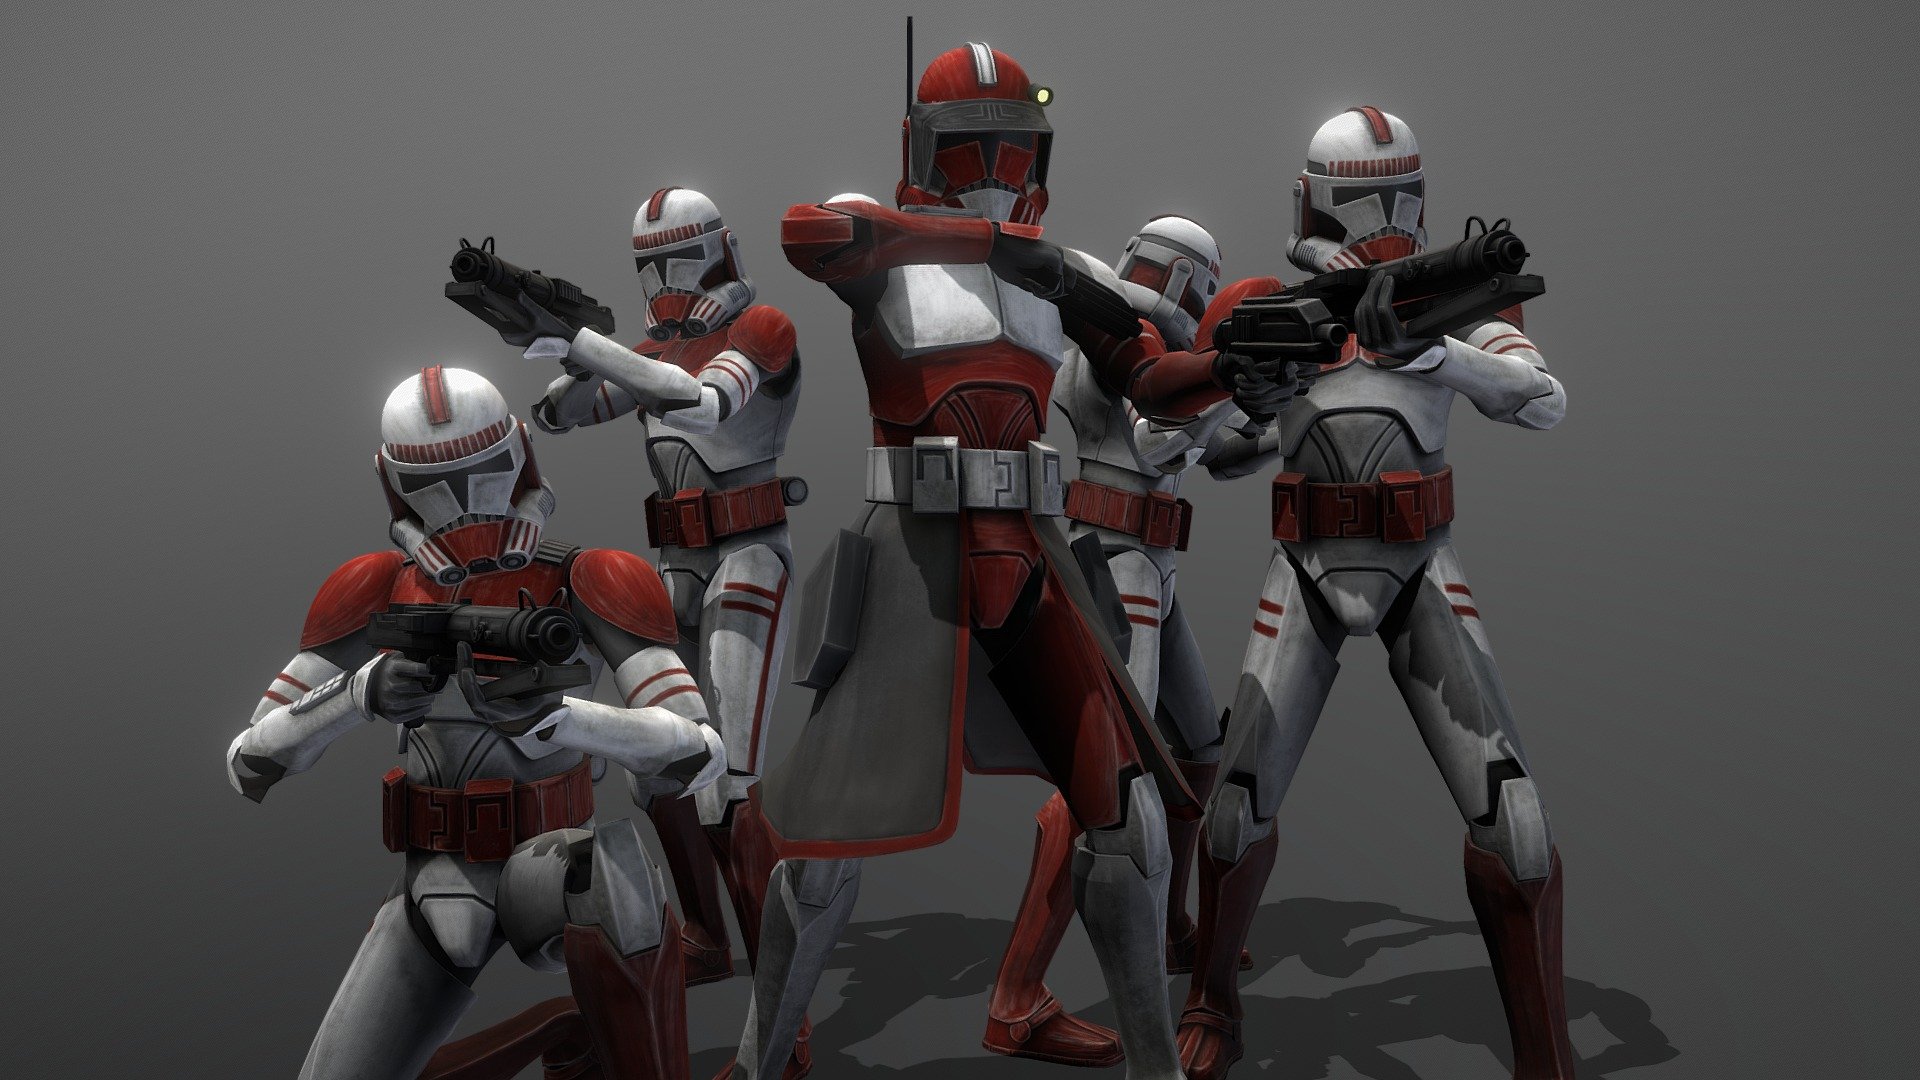 Commander Fox and the Coruscant Guard model by Mike Chan [f25ce4d]